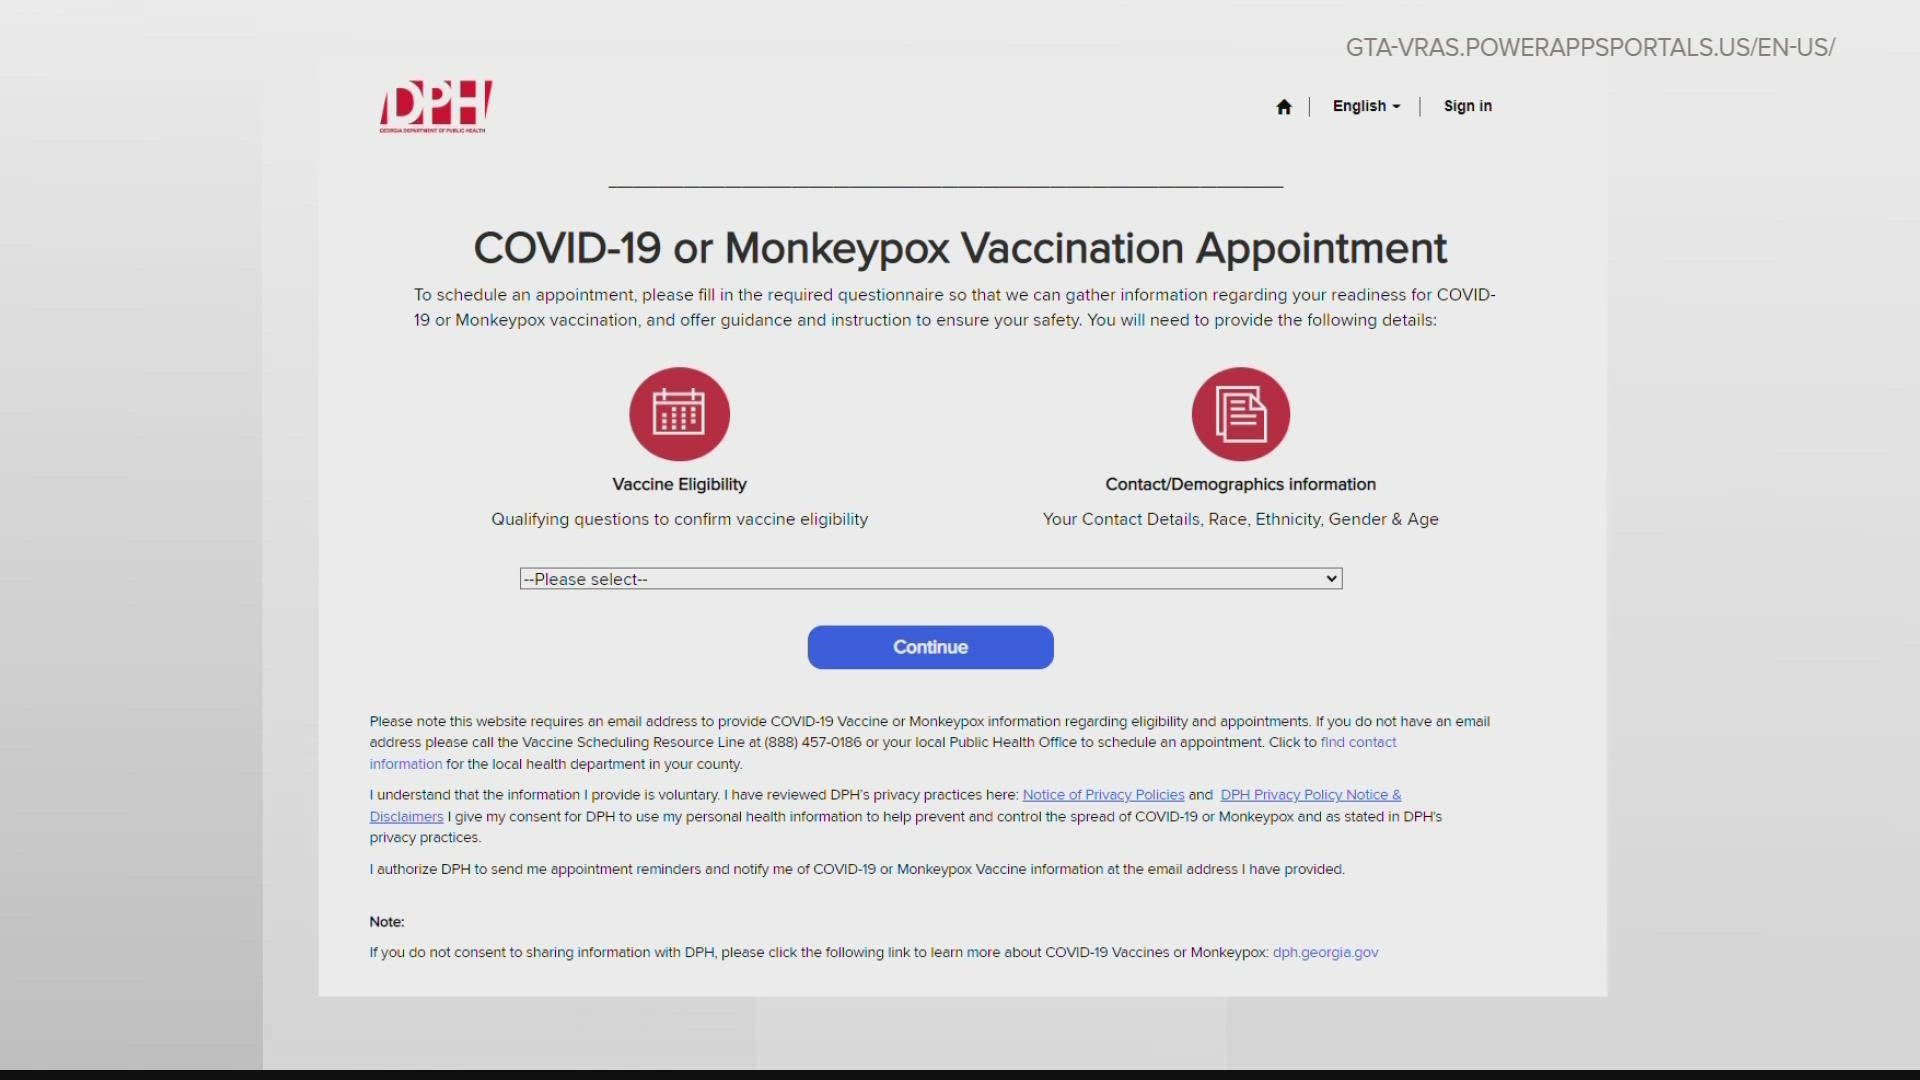 Georgia's Department of Public Health launched a new online scheduling tool for monkeypox vaccine appointments.